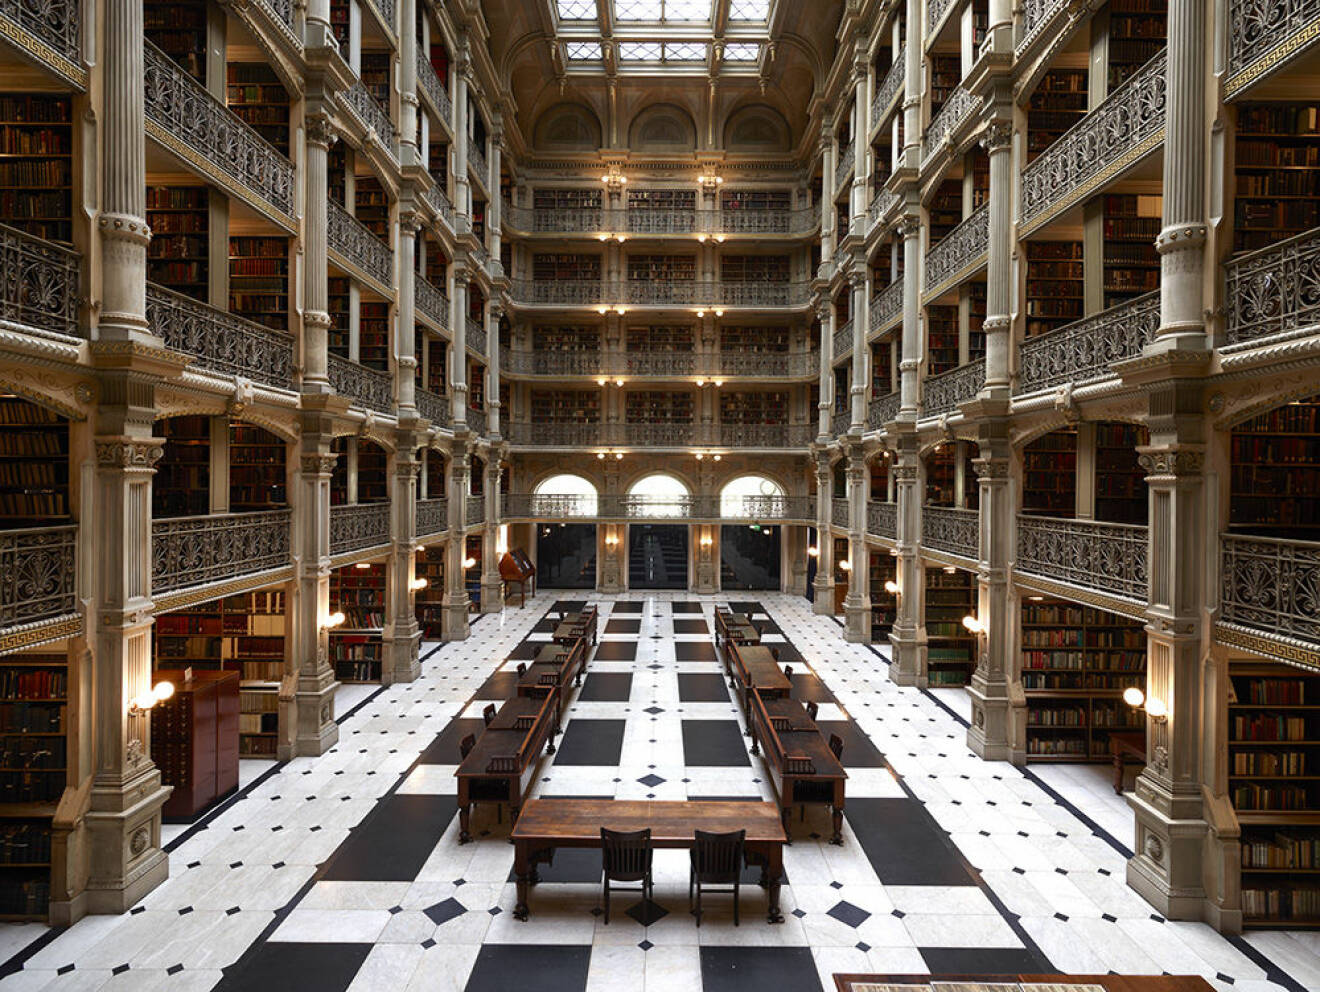 The George Peabody Library, formerly the Library of the Peabody Institute of the City of Baltimore, dates from the founding of the Peabody Institute in 1857. In that year, George Peabody, a Massachusetts-born philanthropist, dedicated the Peabody Institute to the citizens of Baltimore in appreciation of their "kindness and hospitality." The Peabody Library building, which opened in 1878, was designed by Baltimore architect Edmund G. Lind, in collaboration with the first provost, Dr. Nathaniel H. Morison. Renowned for its striking architectural interior, the Peabody Stack Room contains five tiers of ornamental cast-iron balconies, which rise dramatically to the skylight 61 feet above the floor. The ironwork was fabricated by the Bartlett-Robbins Company. The George Peabody Library is part of Johns Hopkins Sheridan Libraries.